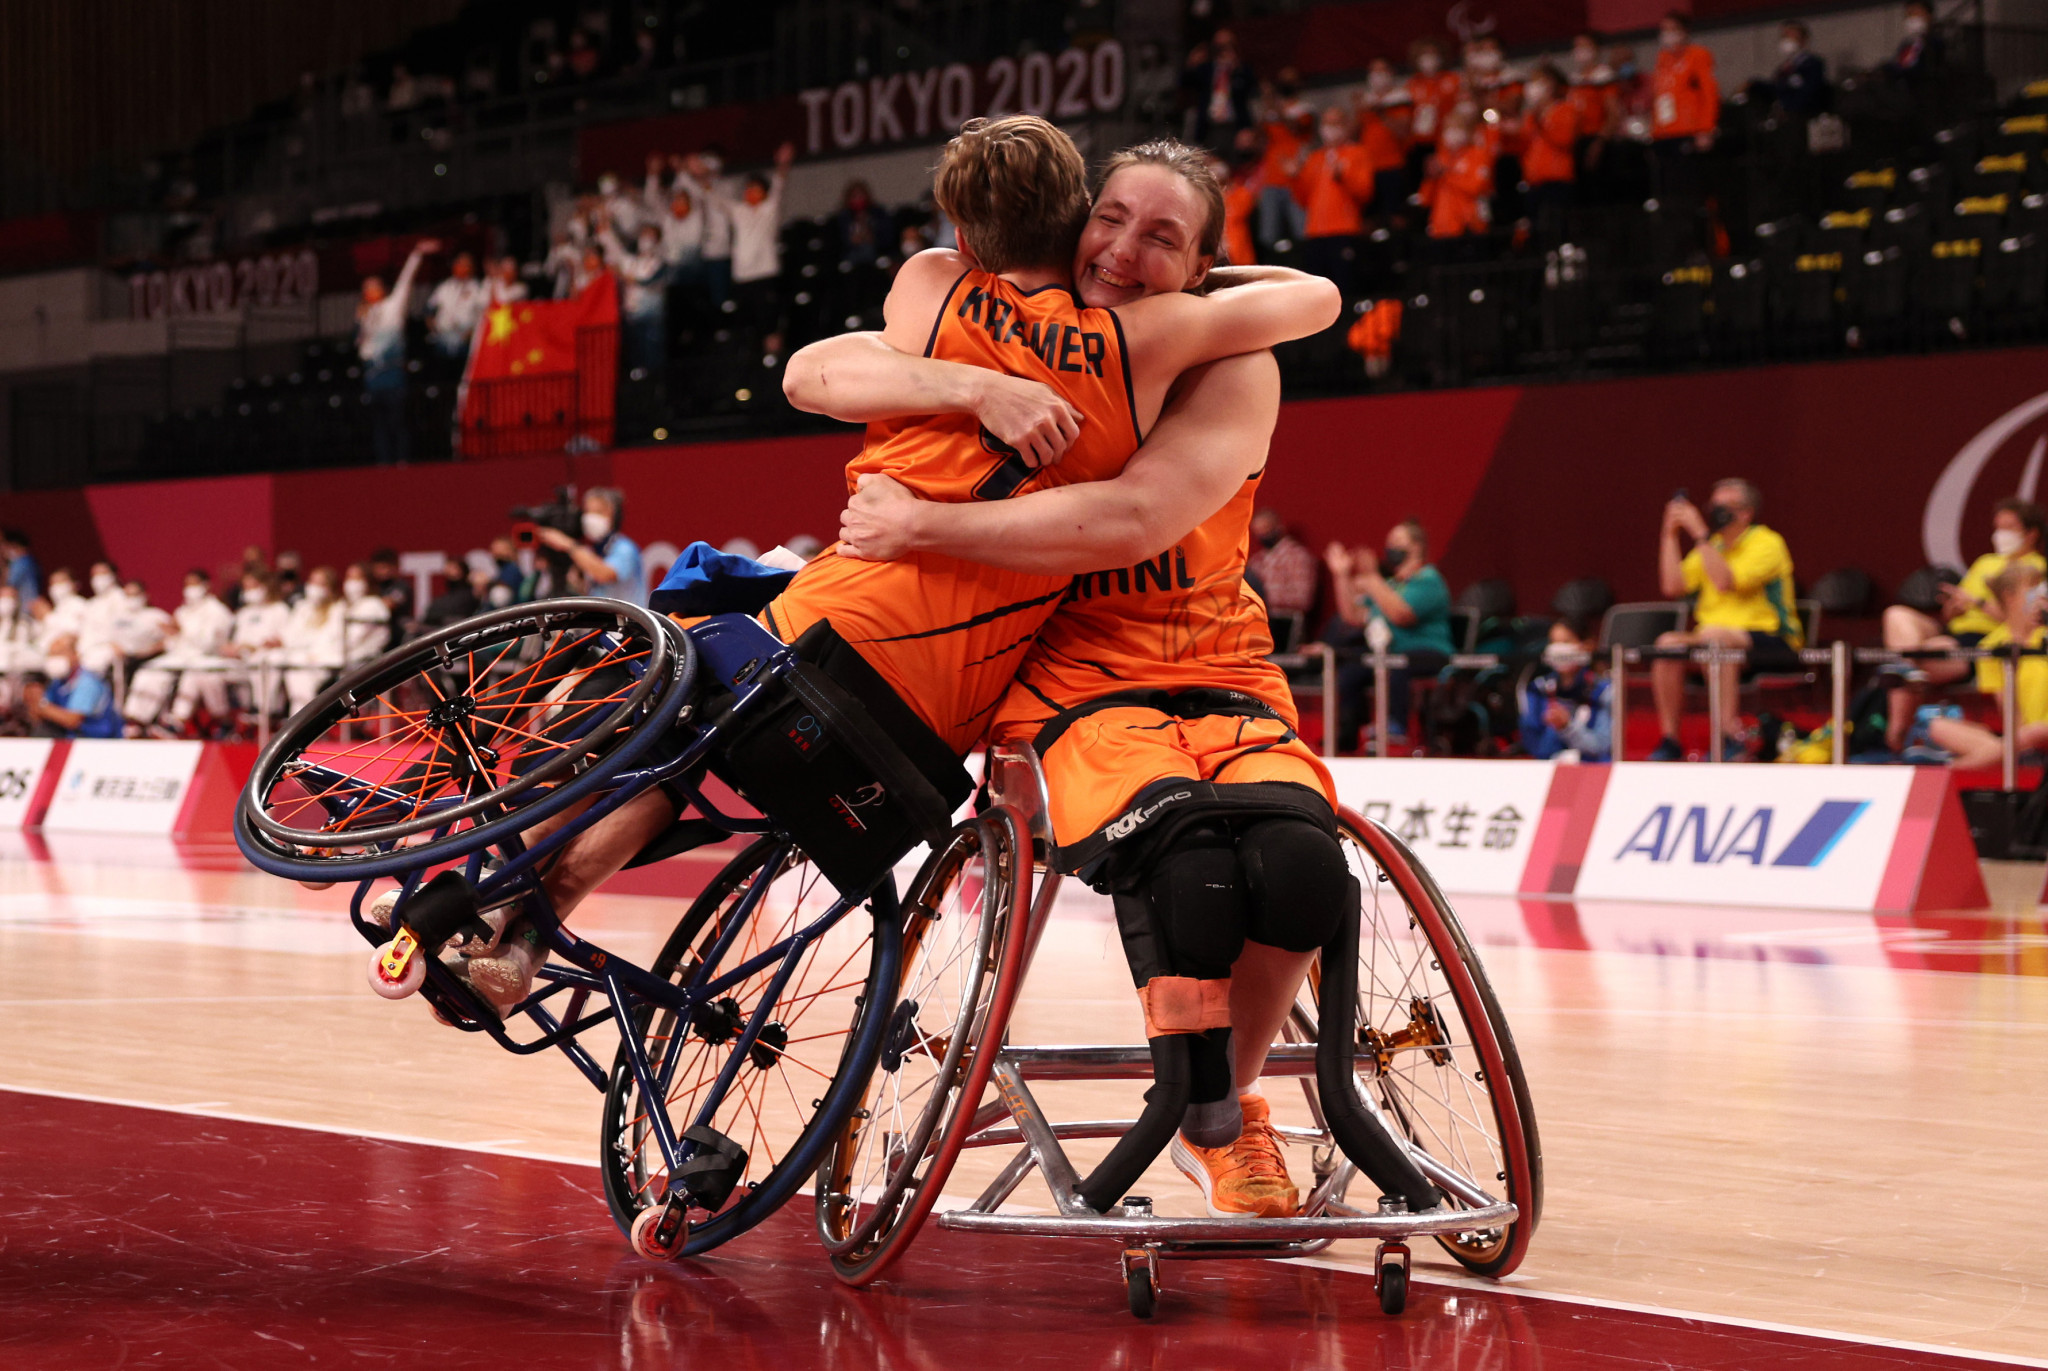 The Netherlands overcame China impressively in the gold medal match ©Getty Images